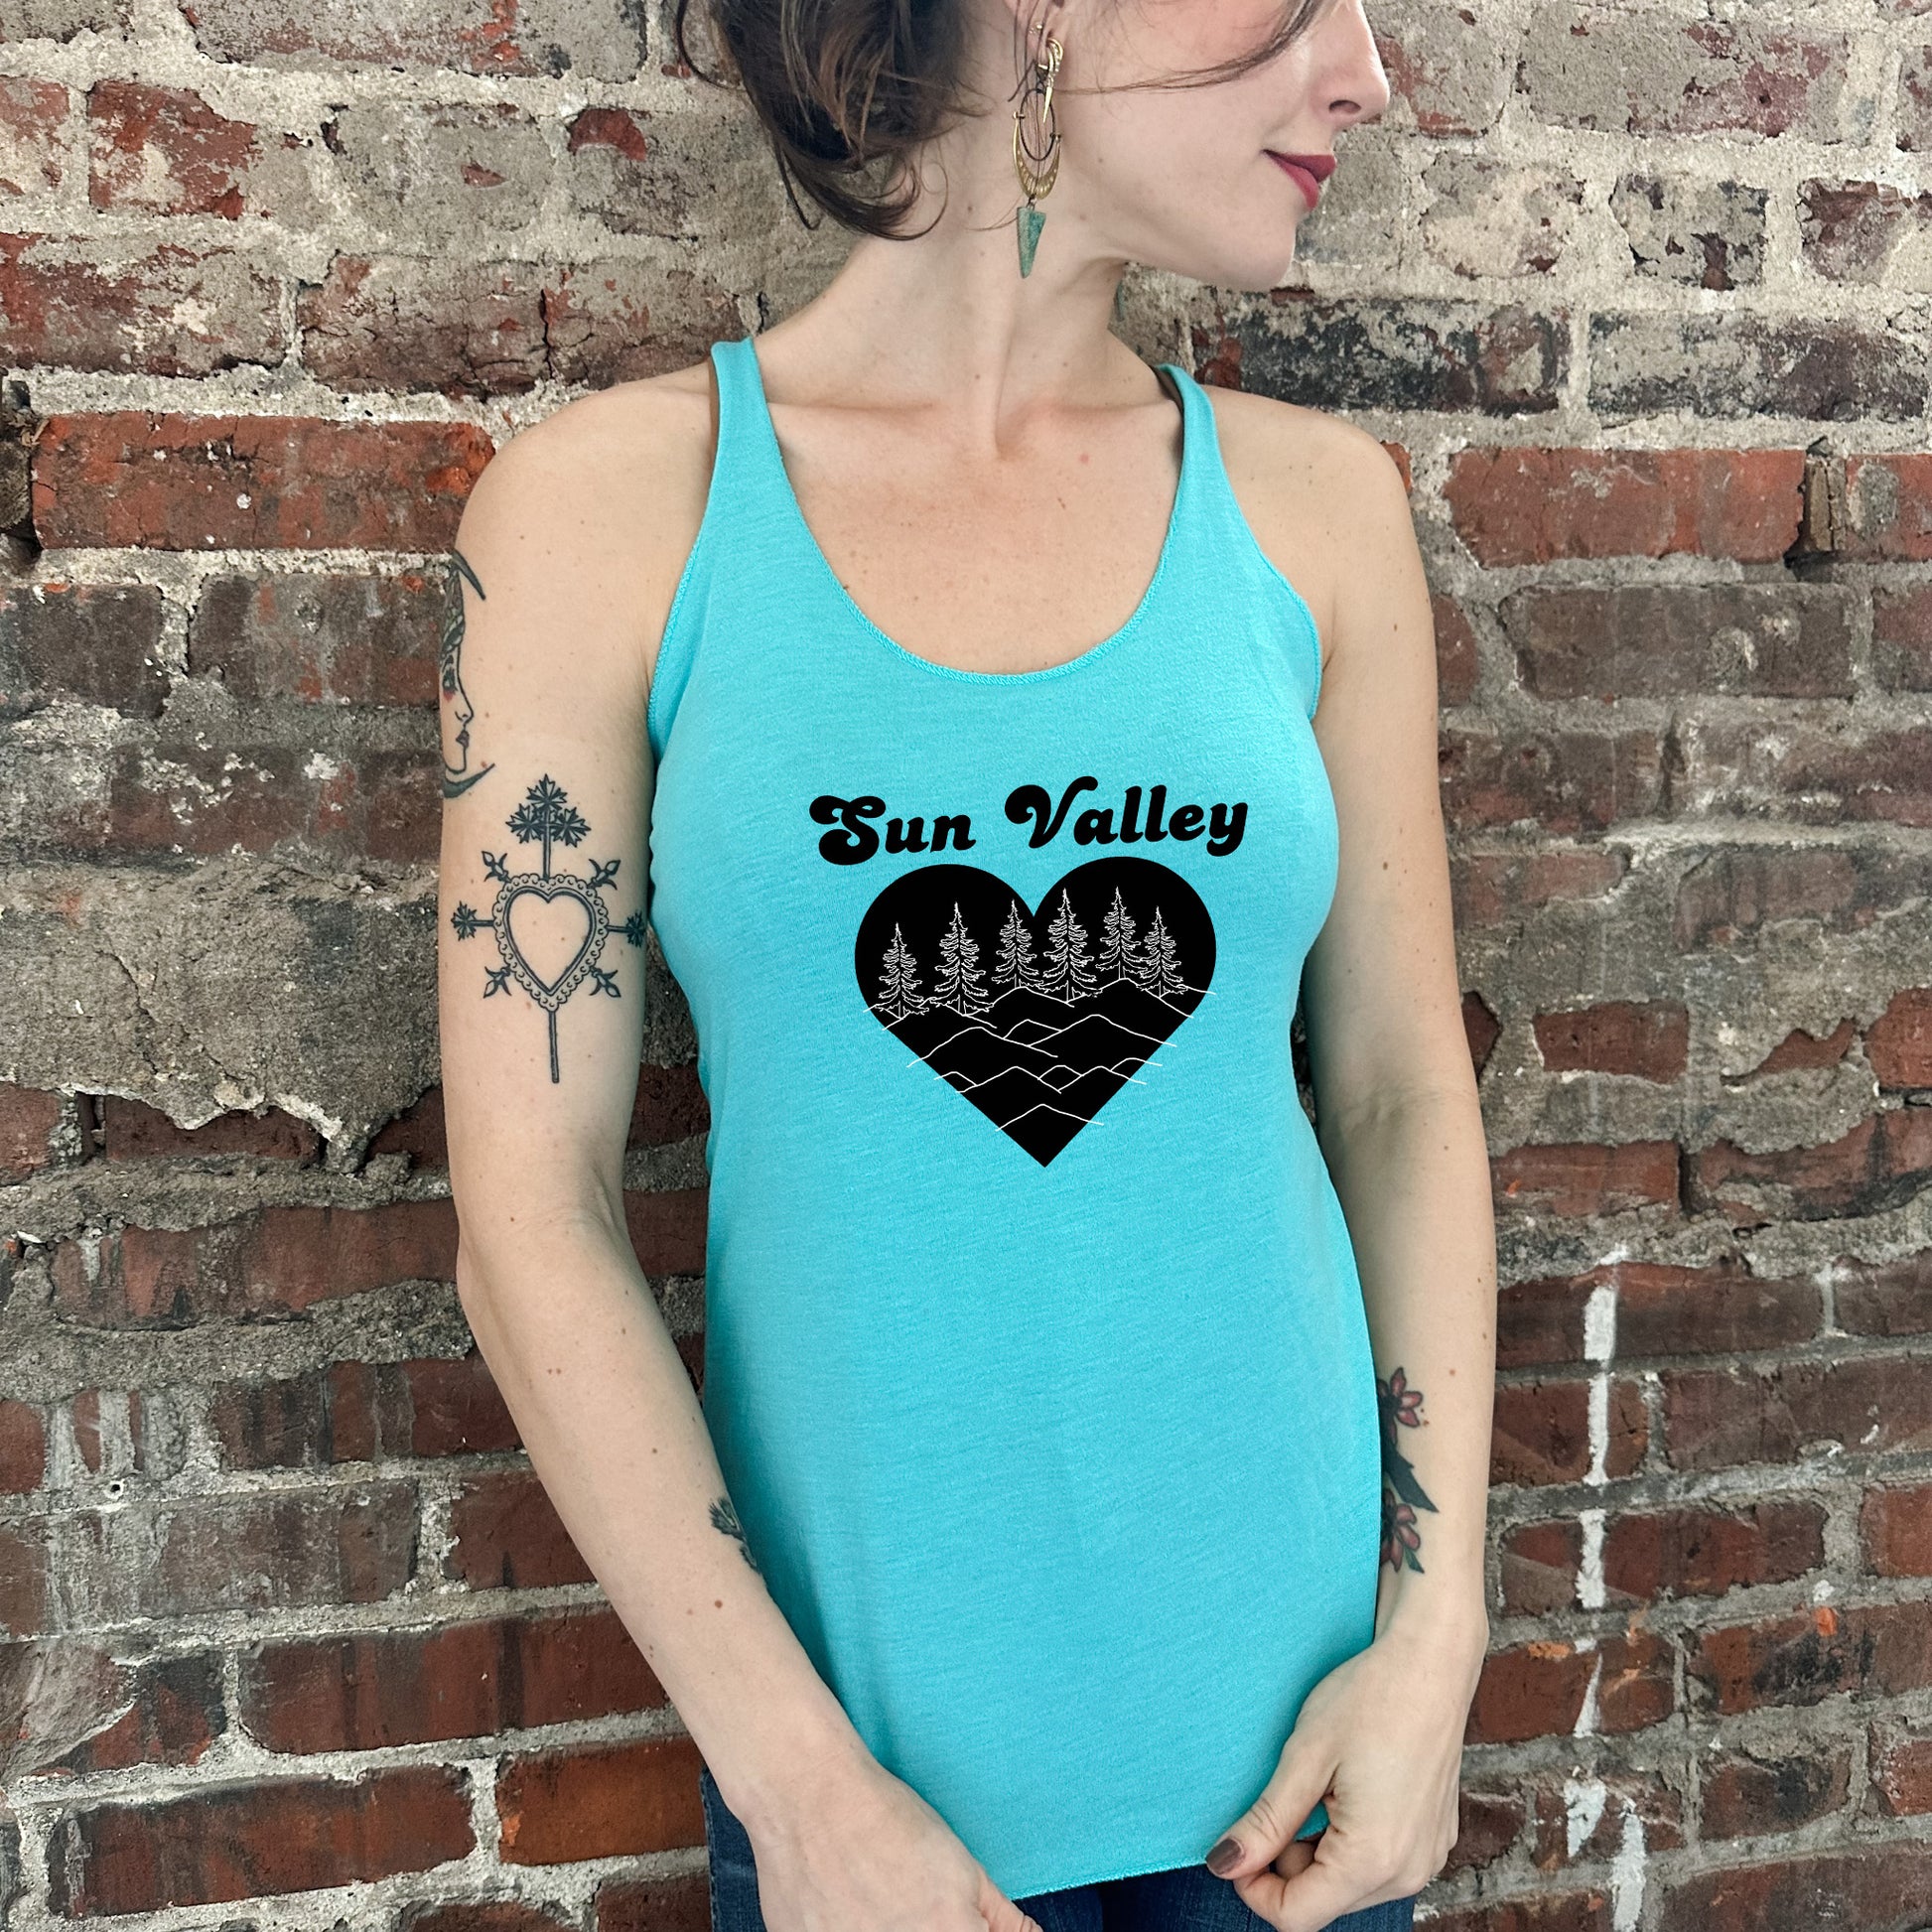 a woman wearing a sun valley tank top standing in front of a brick wall